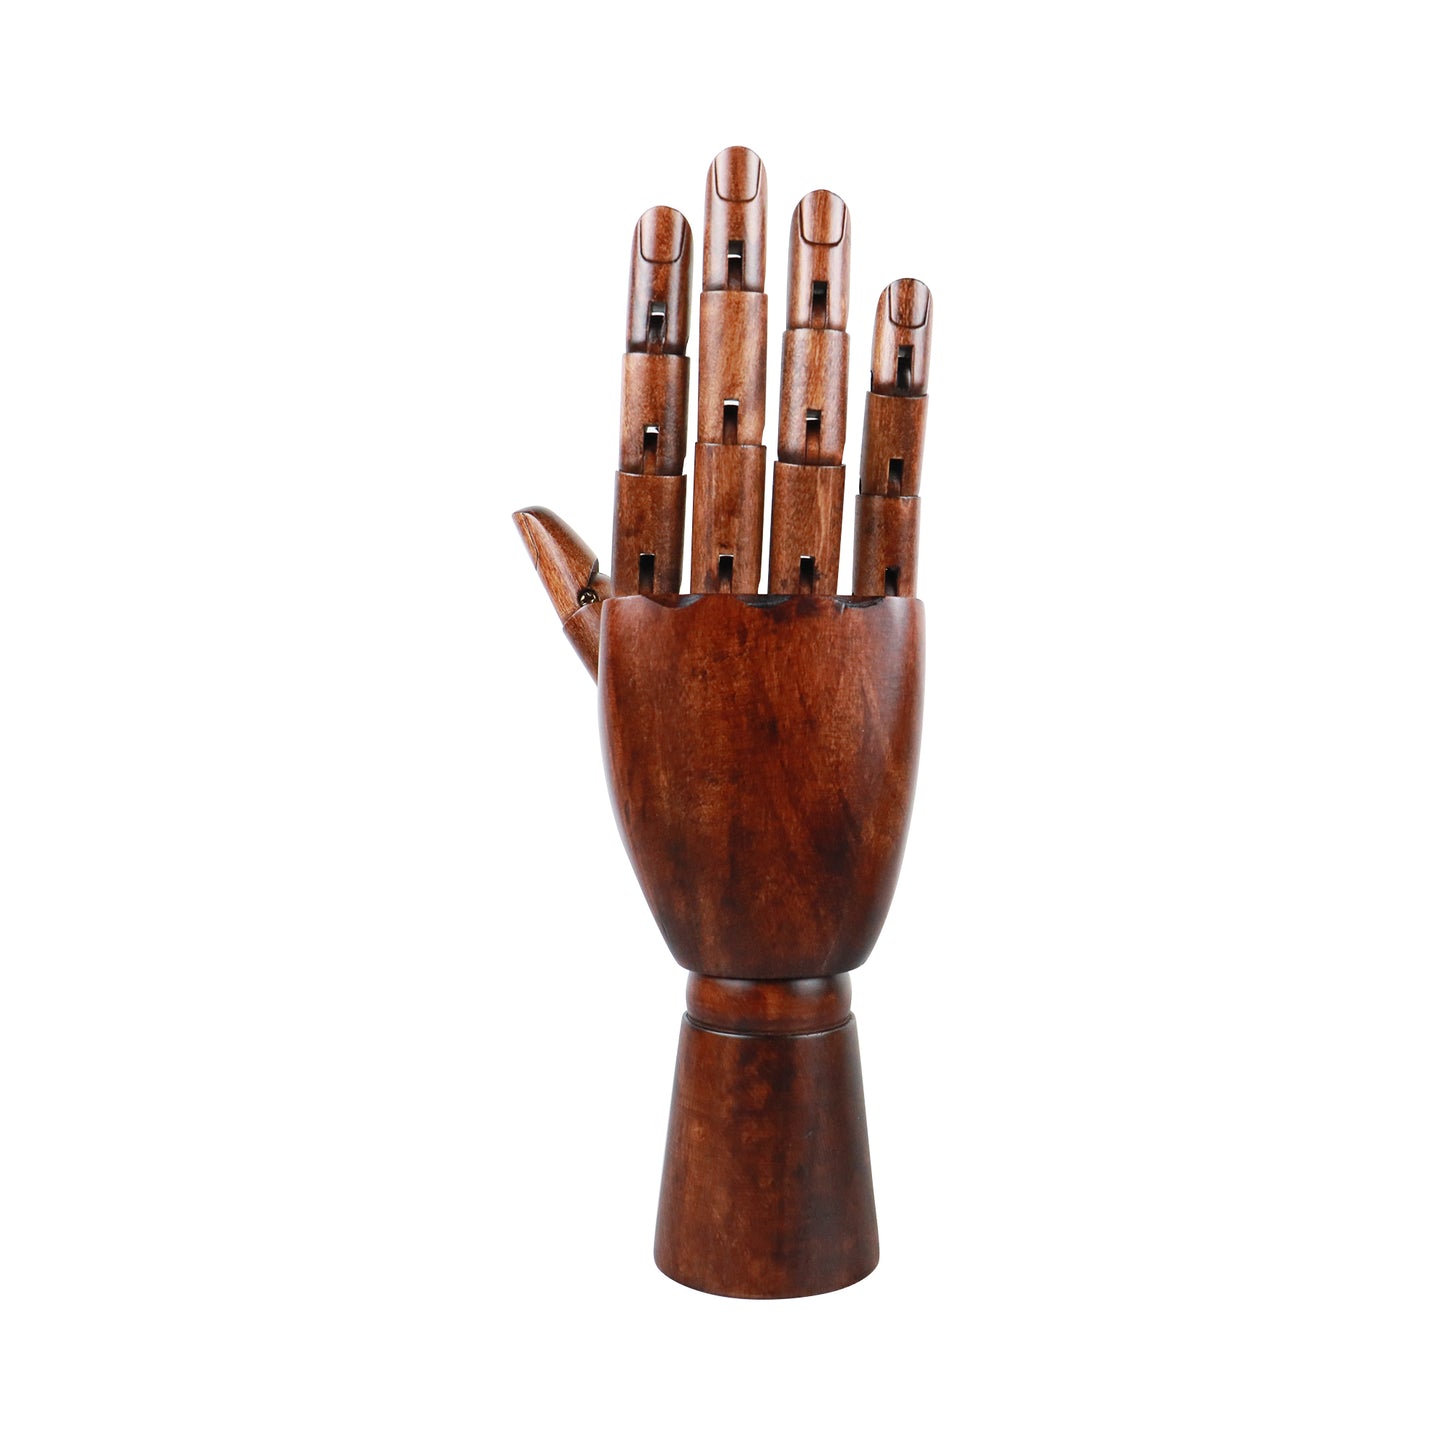 Jelimate Vintage Red Wooden Mannequin Hand Form,Shop Decoration Hand Dress Form,Sunglasses Hat Glove Jewelry Display Hand Model